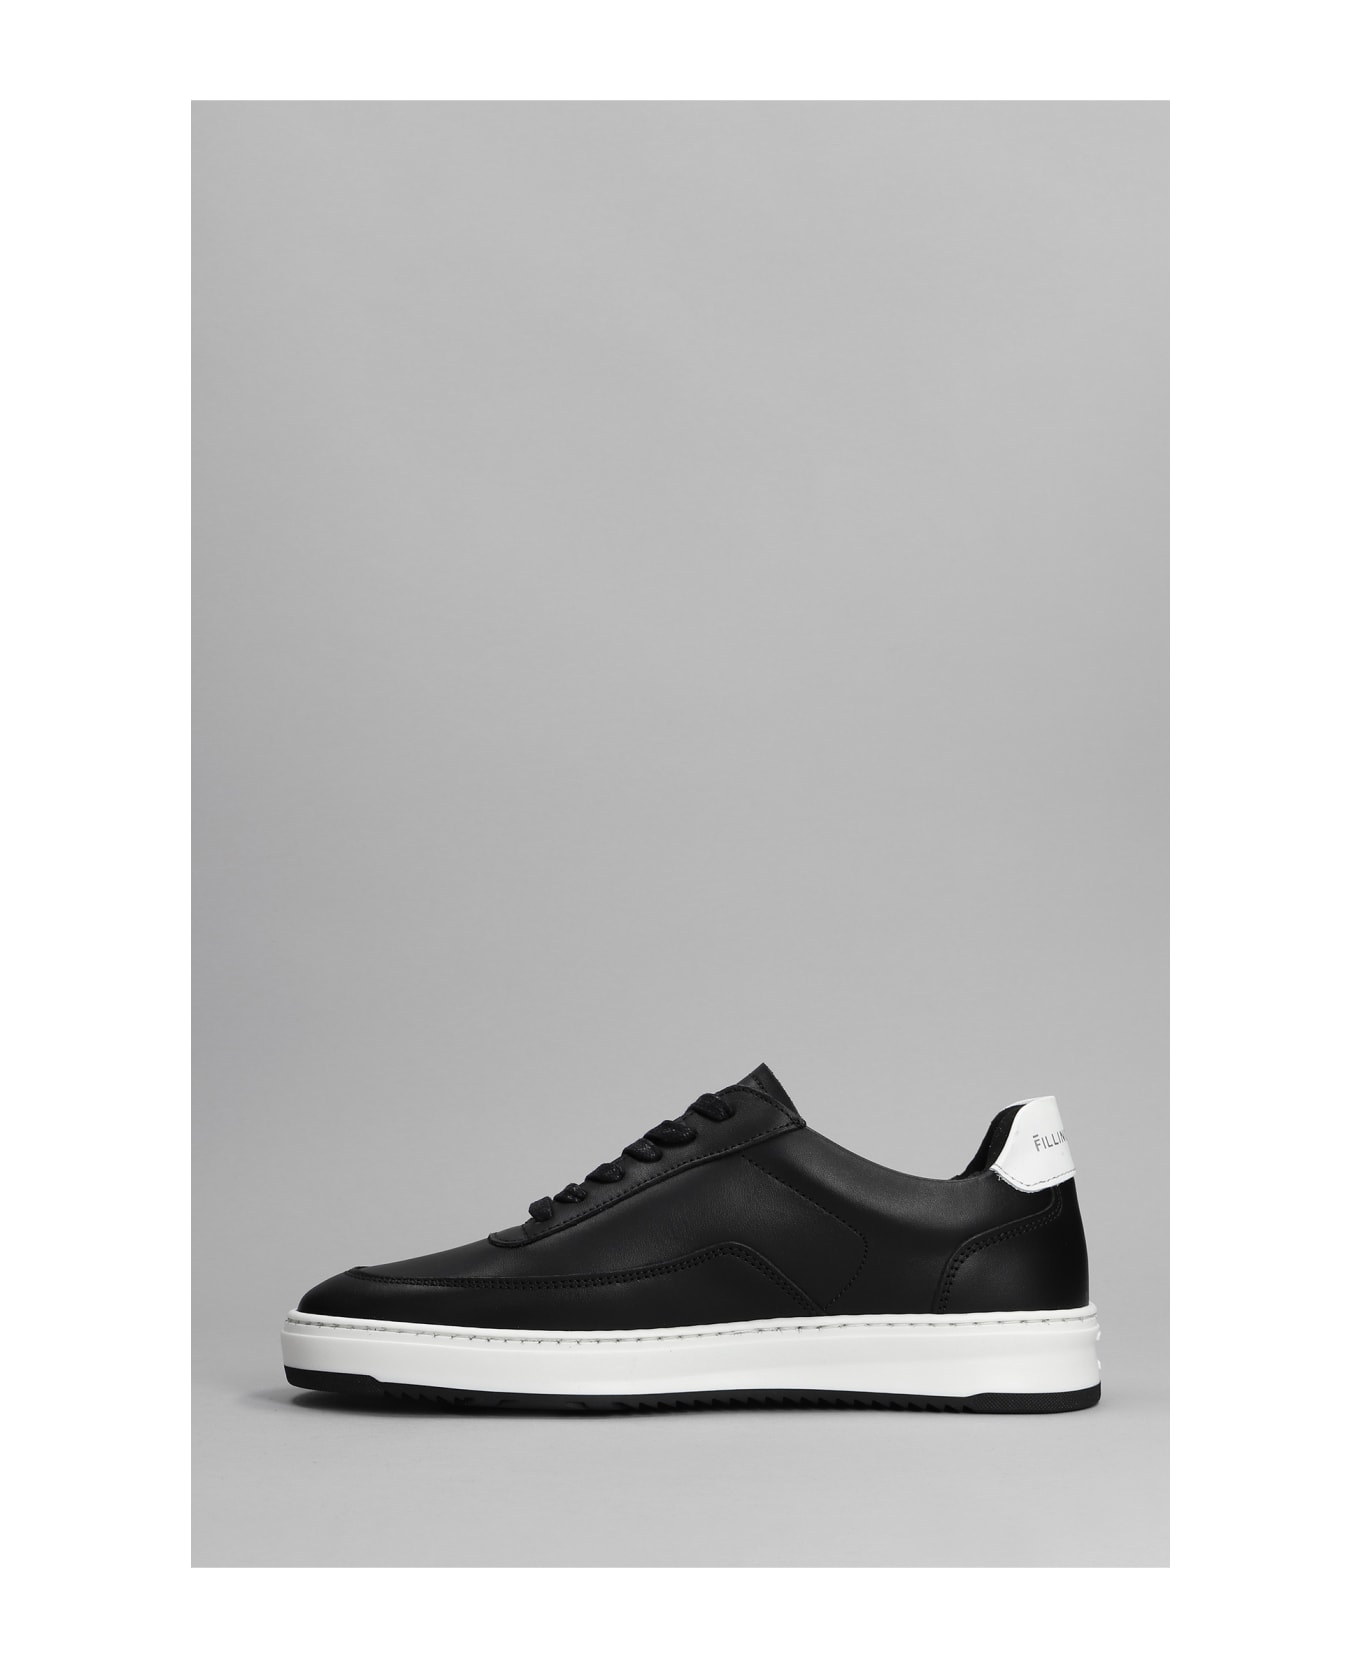 Filling Pieces Mondo Lux Sneakers In Black Leather - Black スニーカー